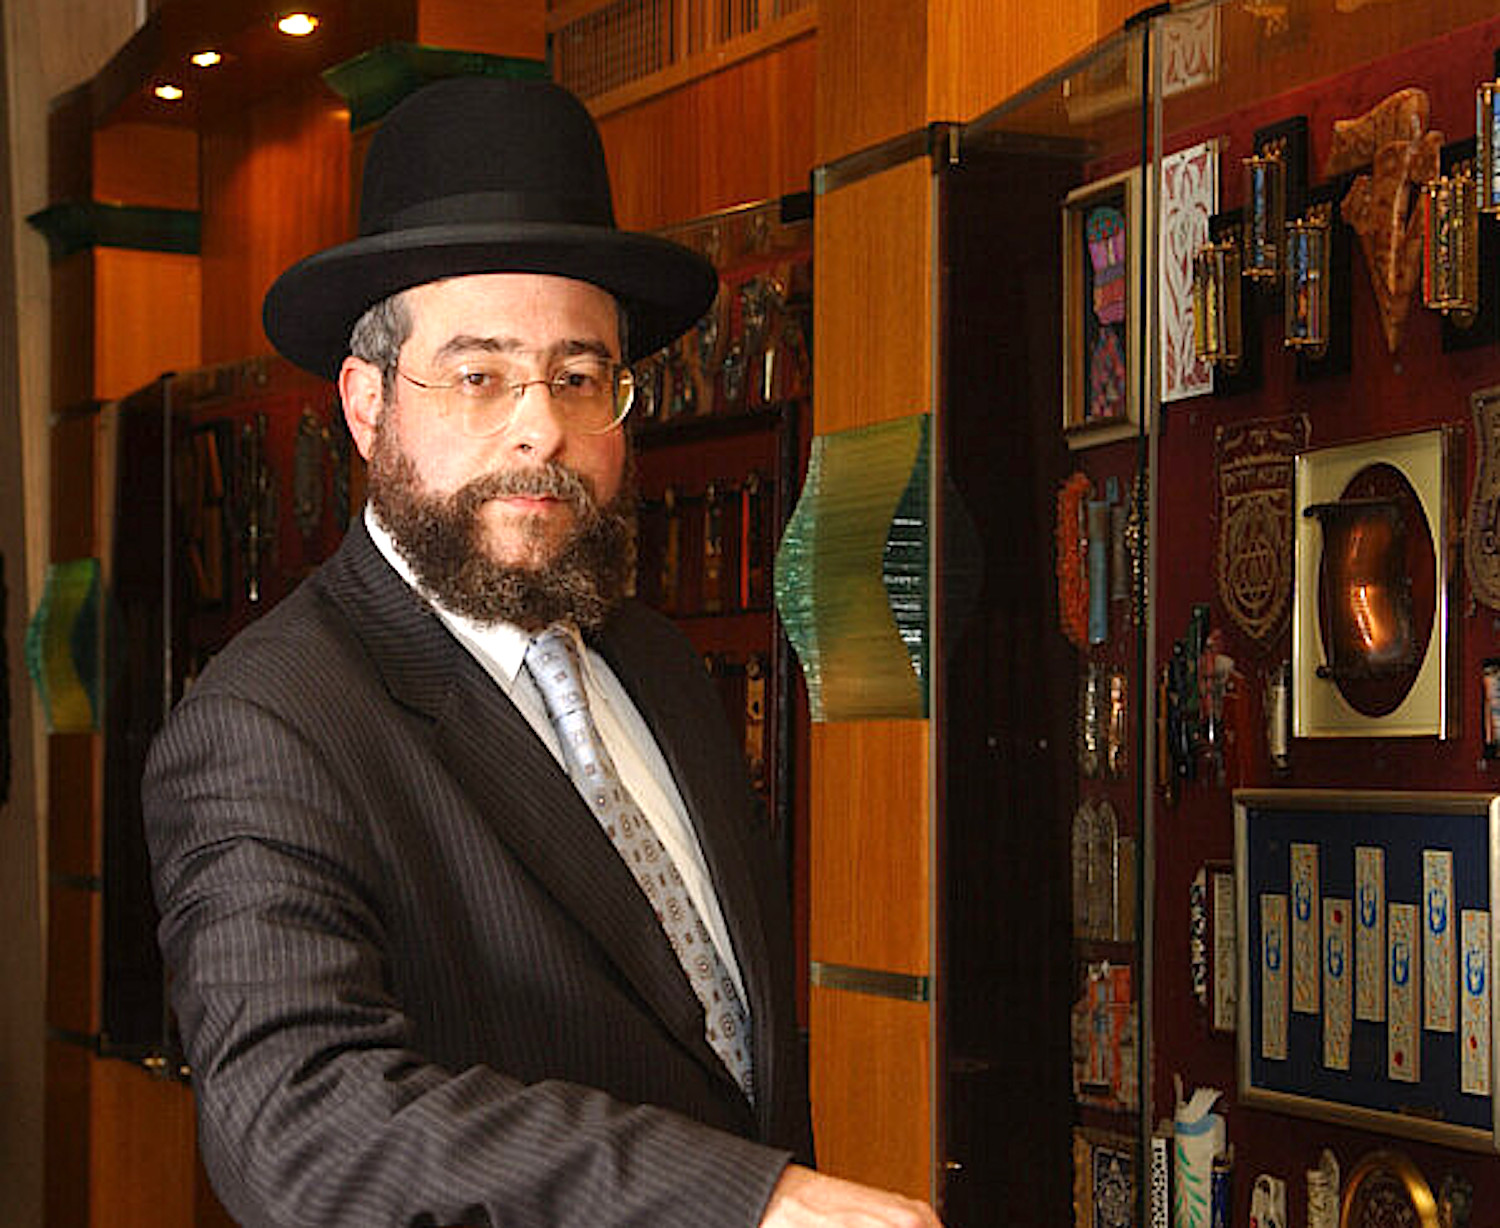 Moscow’s ‘rebel rabbi’ says Russian Jewish community is held ‘hostage’